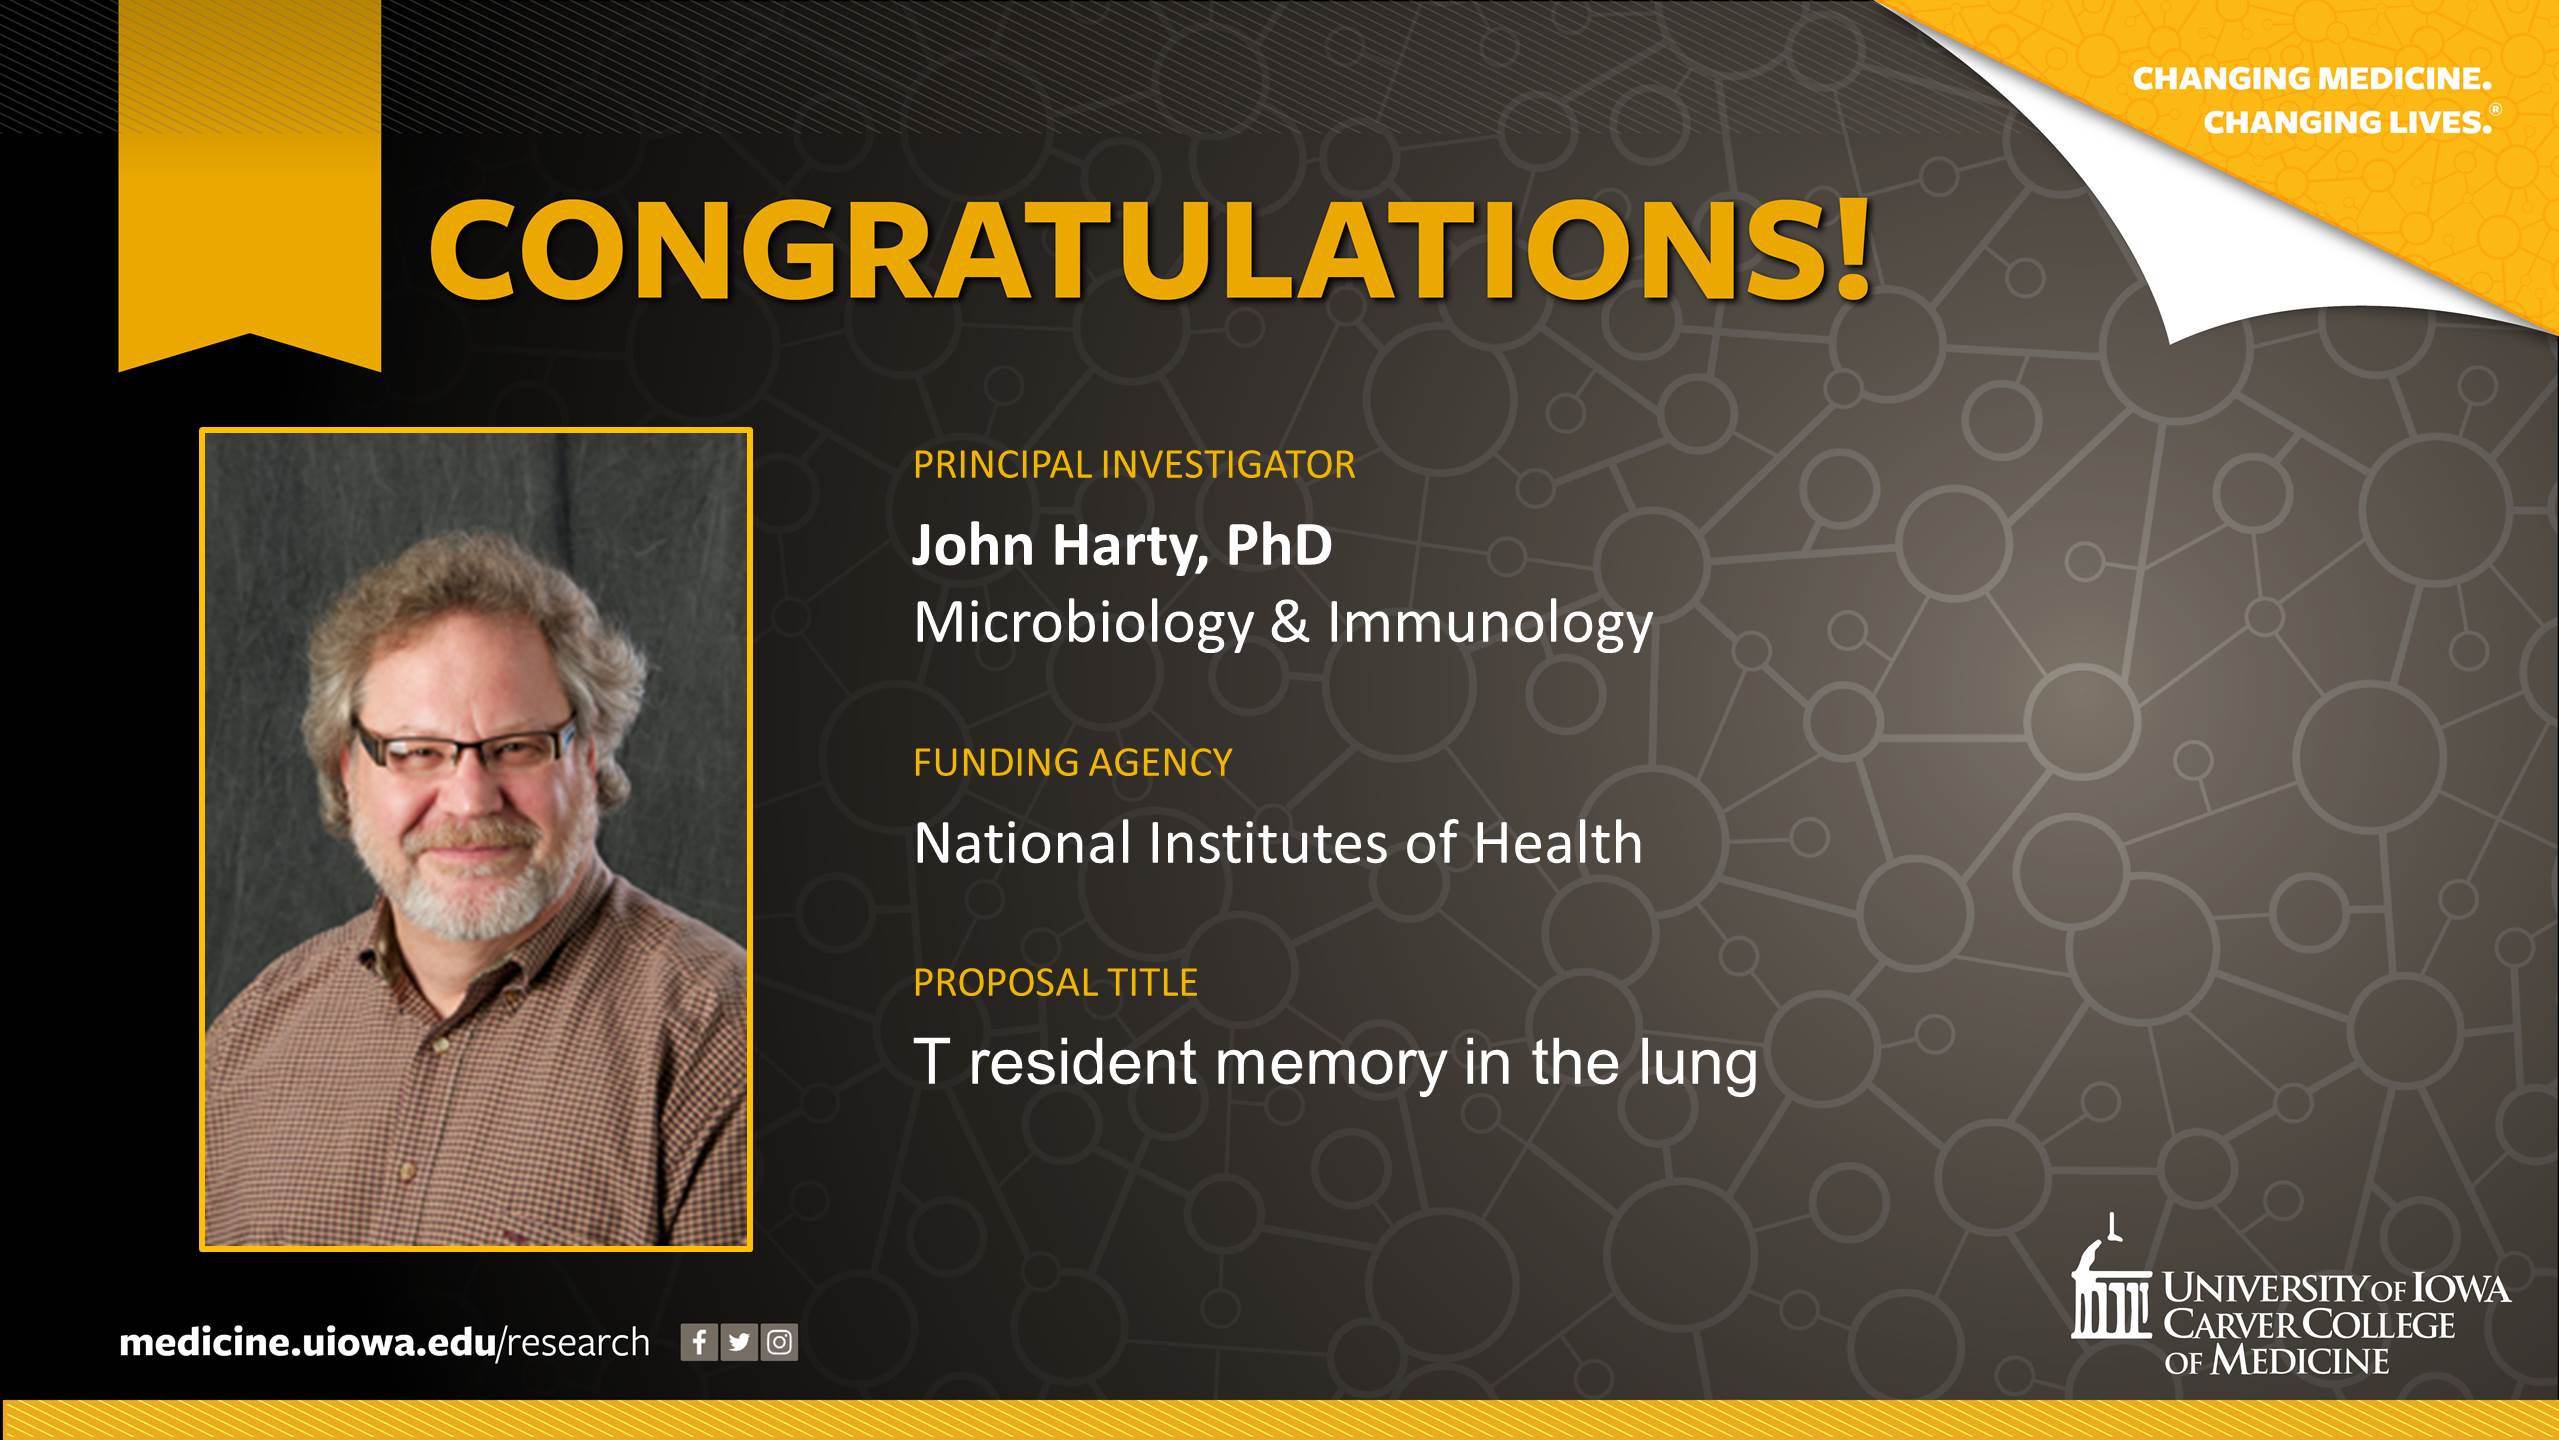 NEW FUNDING - John Harty, PI - National Institutes of Health